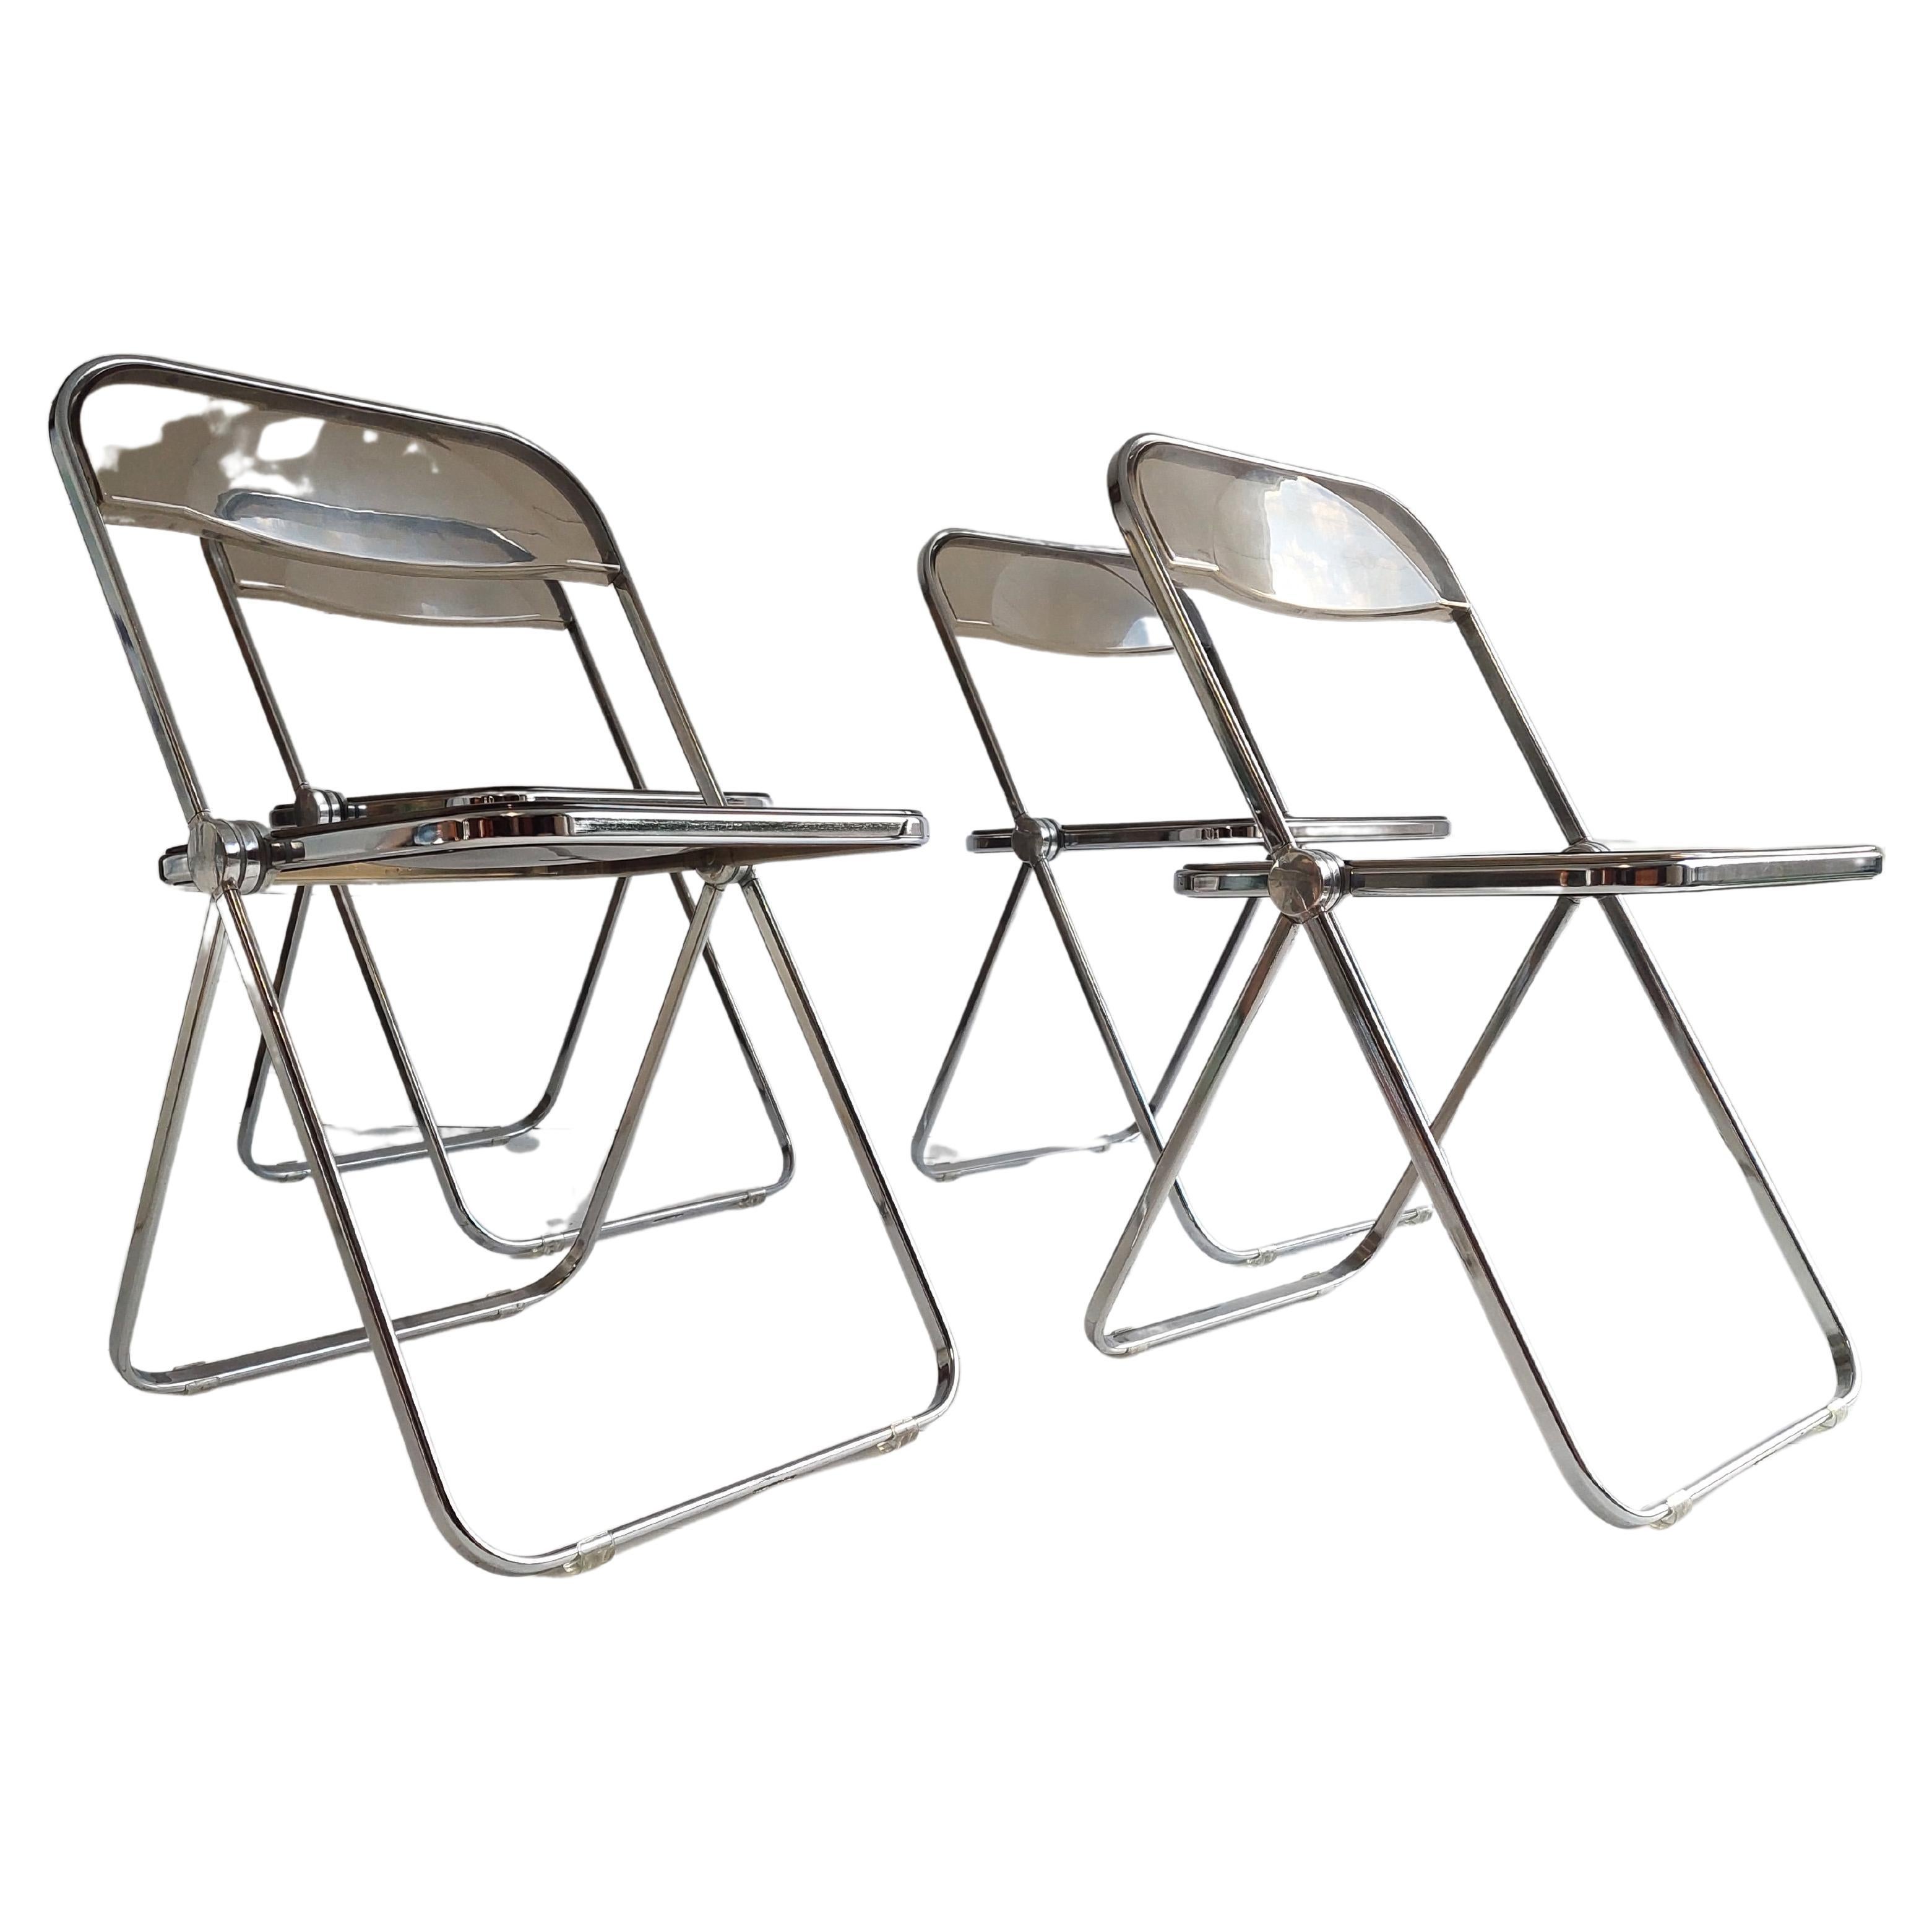 Plia Folding Chairs by Giancarlo Piretti for Castelli 60/70s Set of 4 For Sale